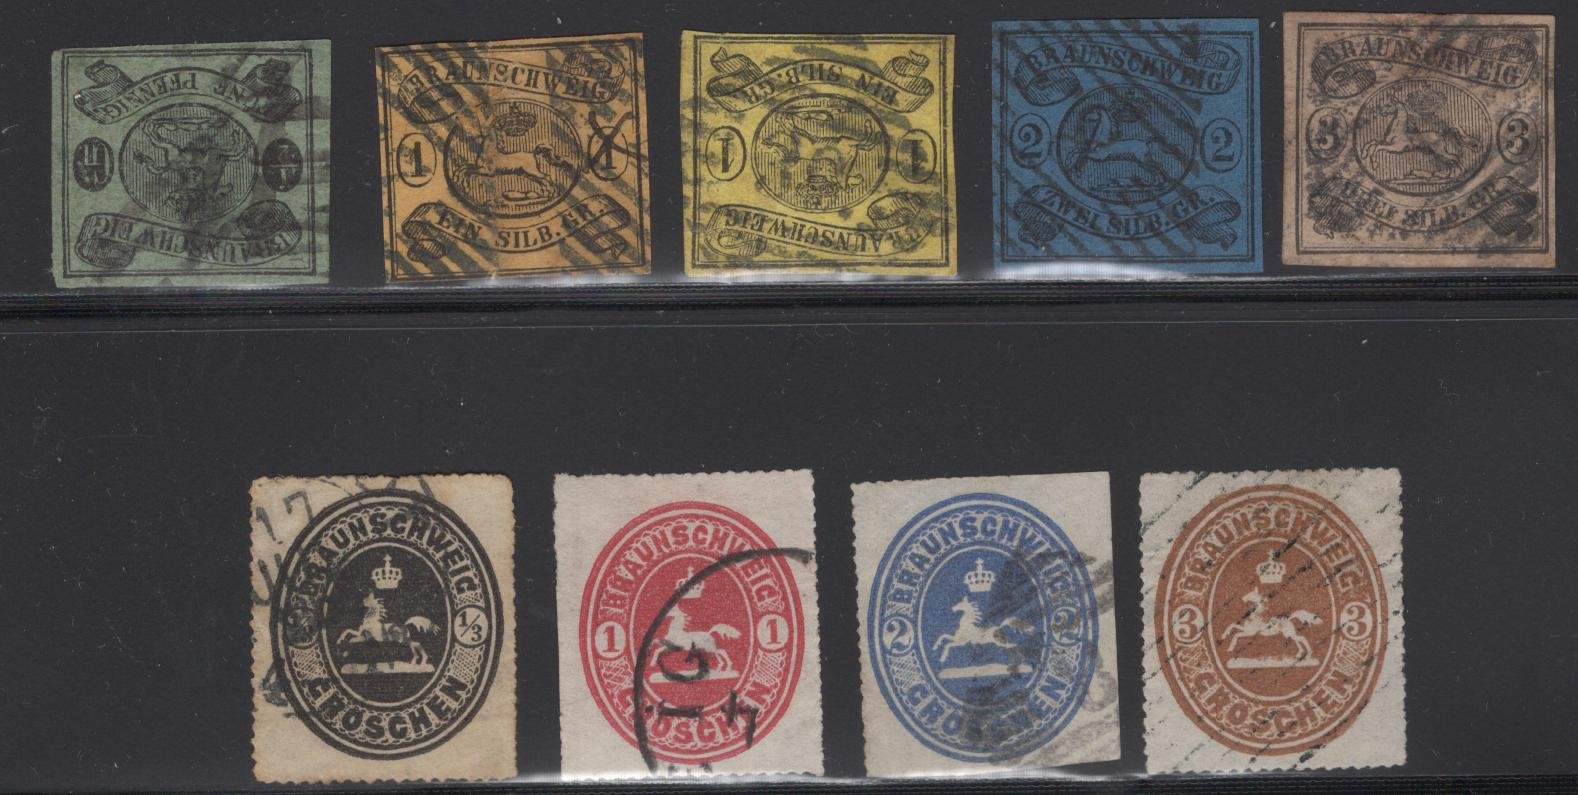 Lot #12 – Brunswick – 9 different stamps in F/VF condition – catalog value 1100+